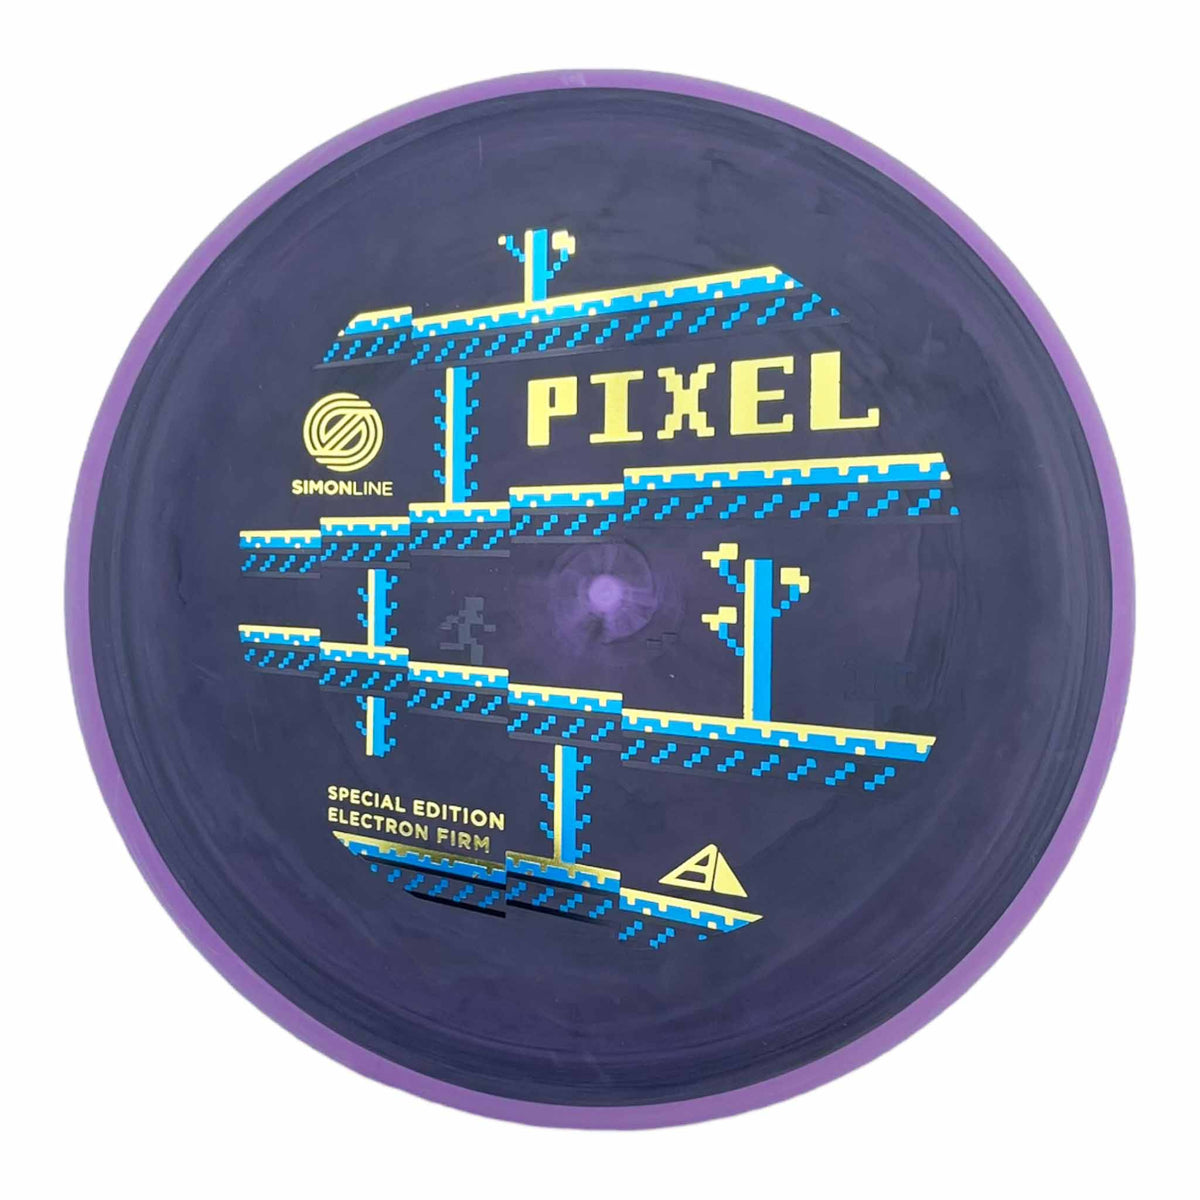 Axiom Discs Simon Line Electron Firm Pixel Special Edition putter and approach - Purple / Blue / Gold